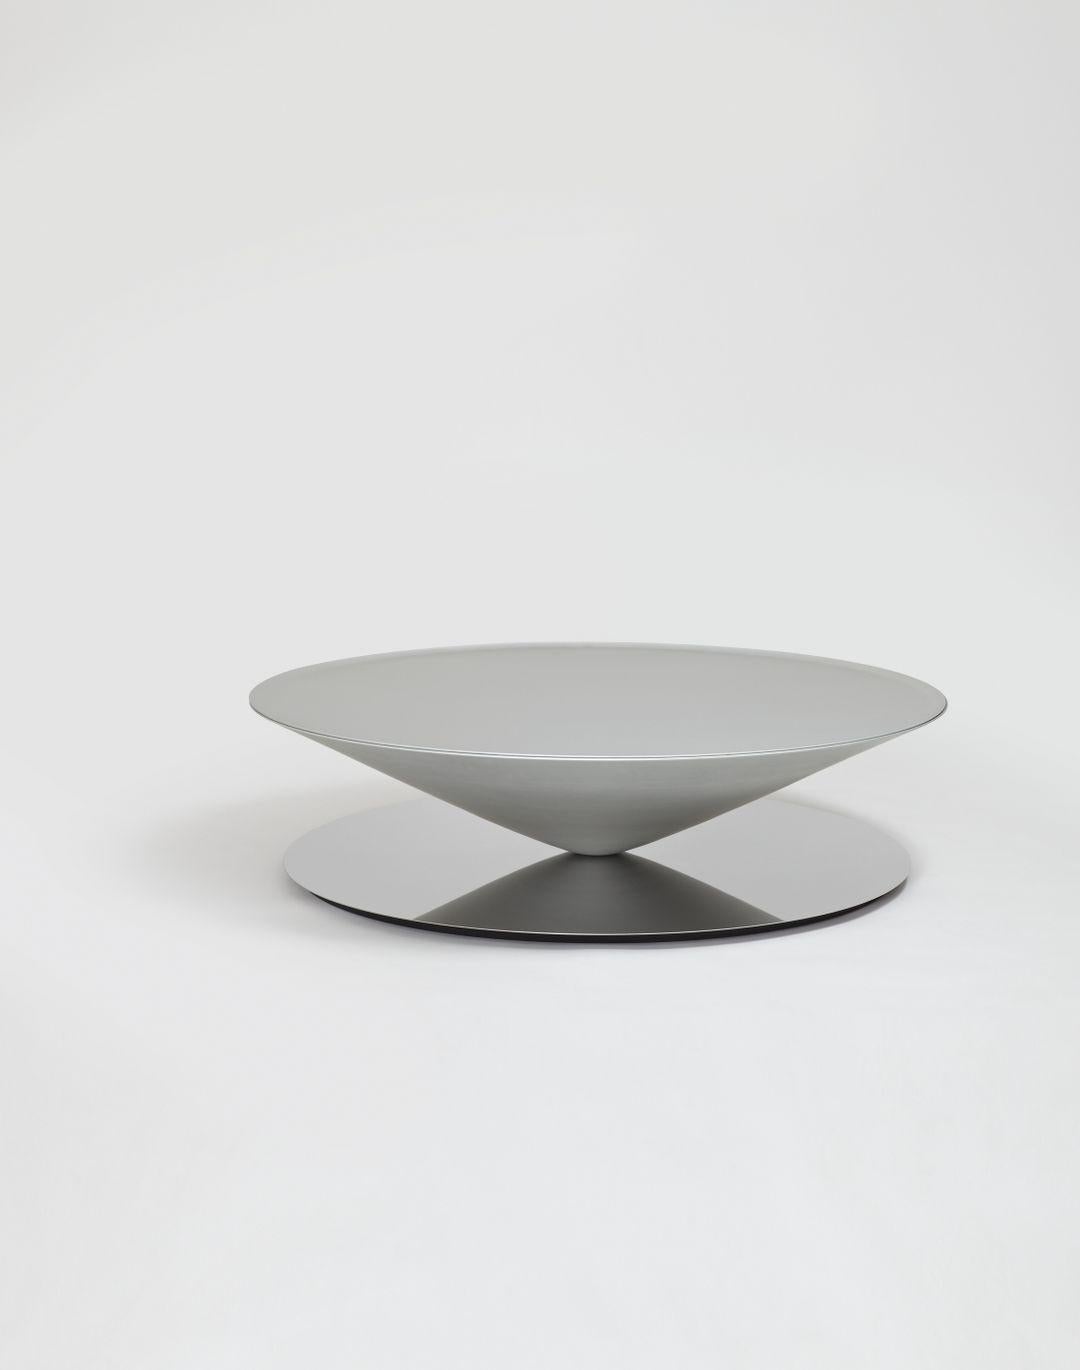 Float is a sculptural coffee table that challenges senses and perception. A massive metal cone apparently floats above a mirror polished steel base. The geometrical design is softened by refined details such as the bezelled lip on the edges of the